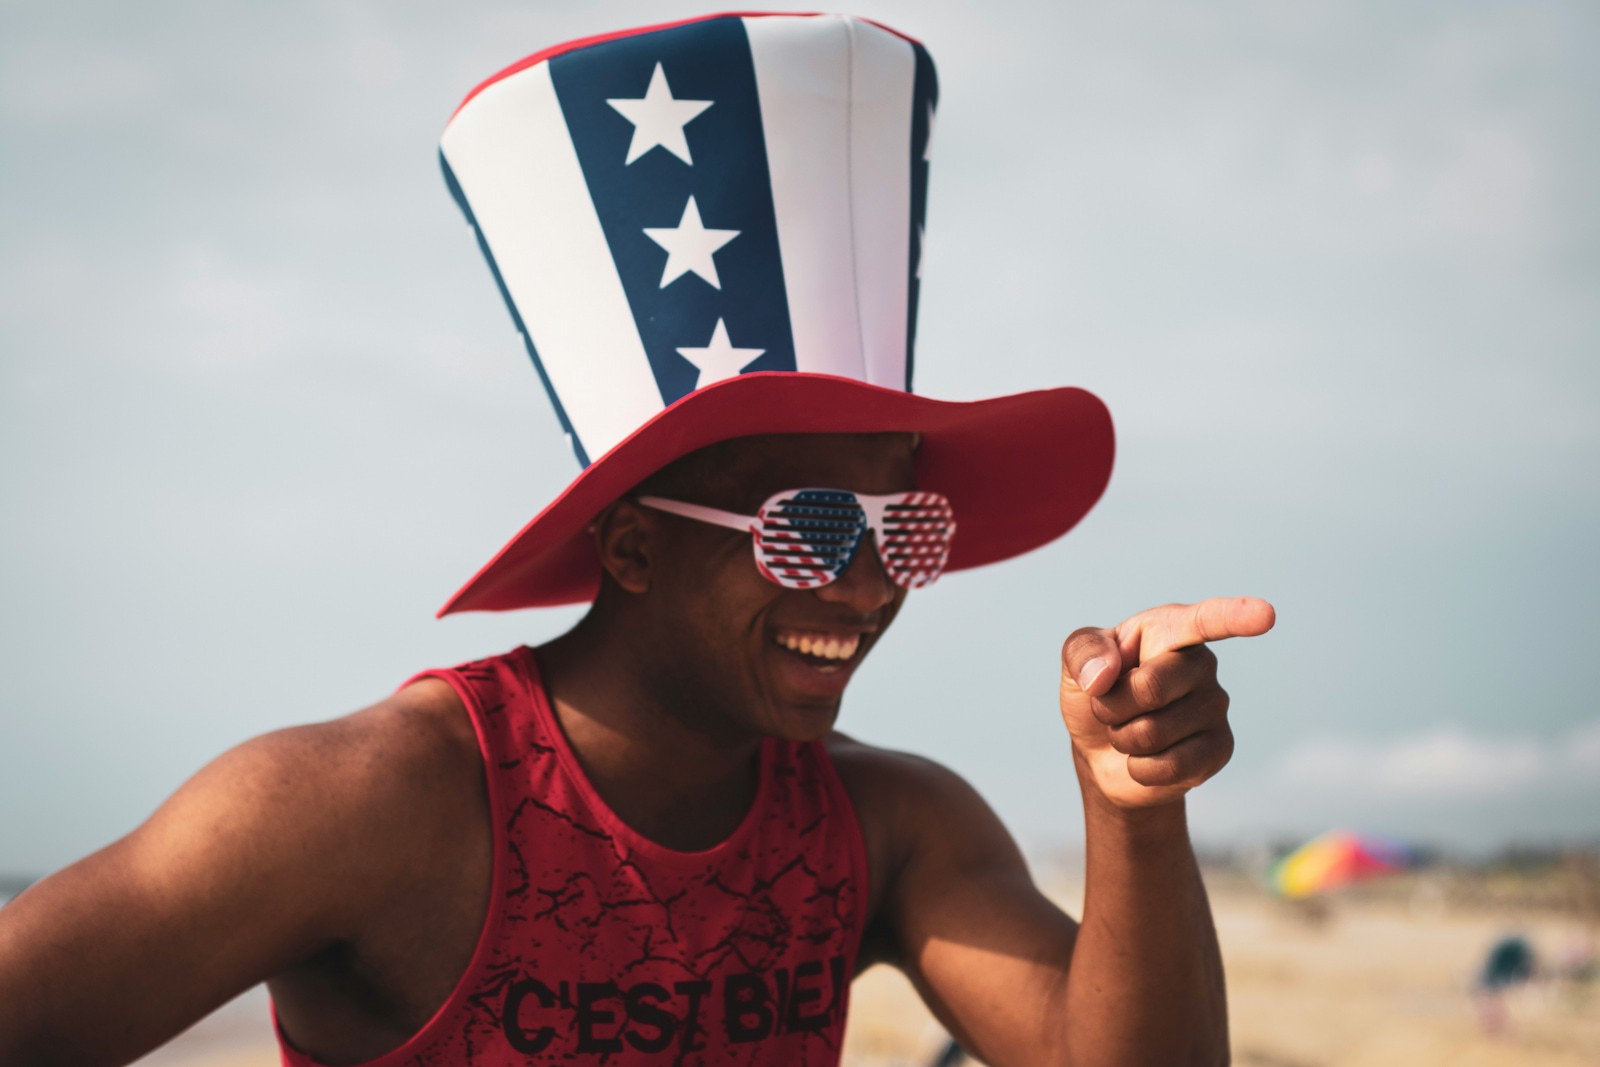 A man wearing US flag-themed sunglasses and hat